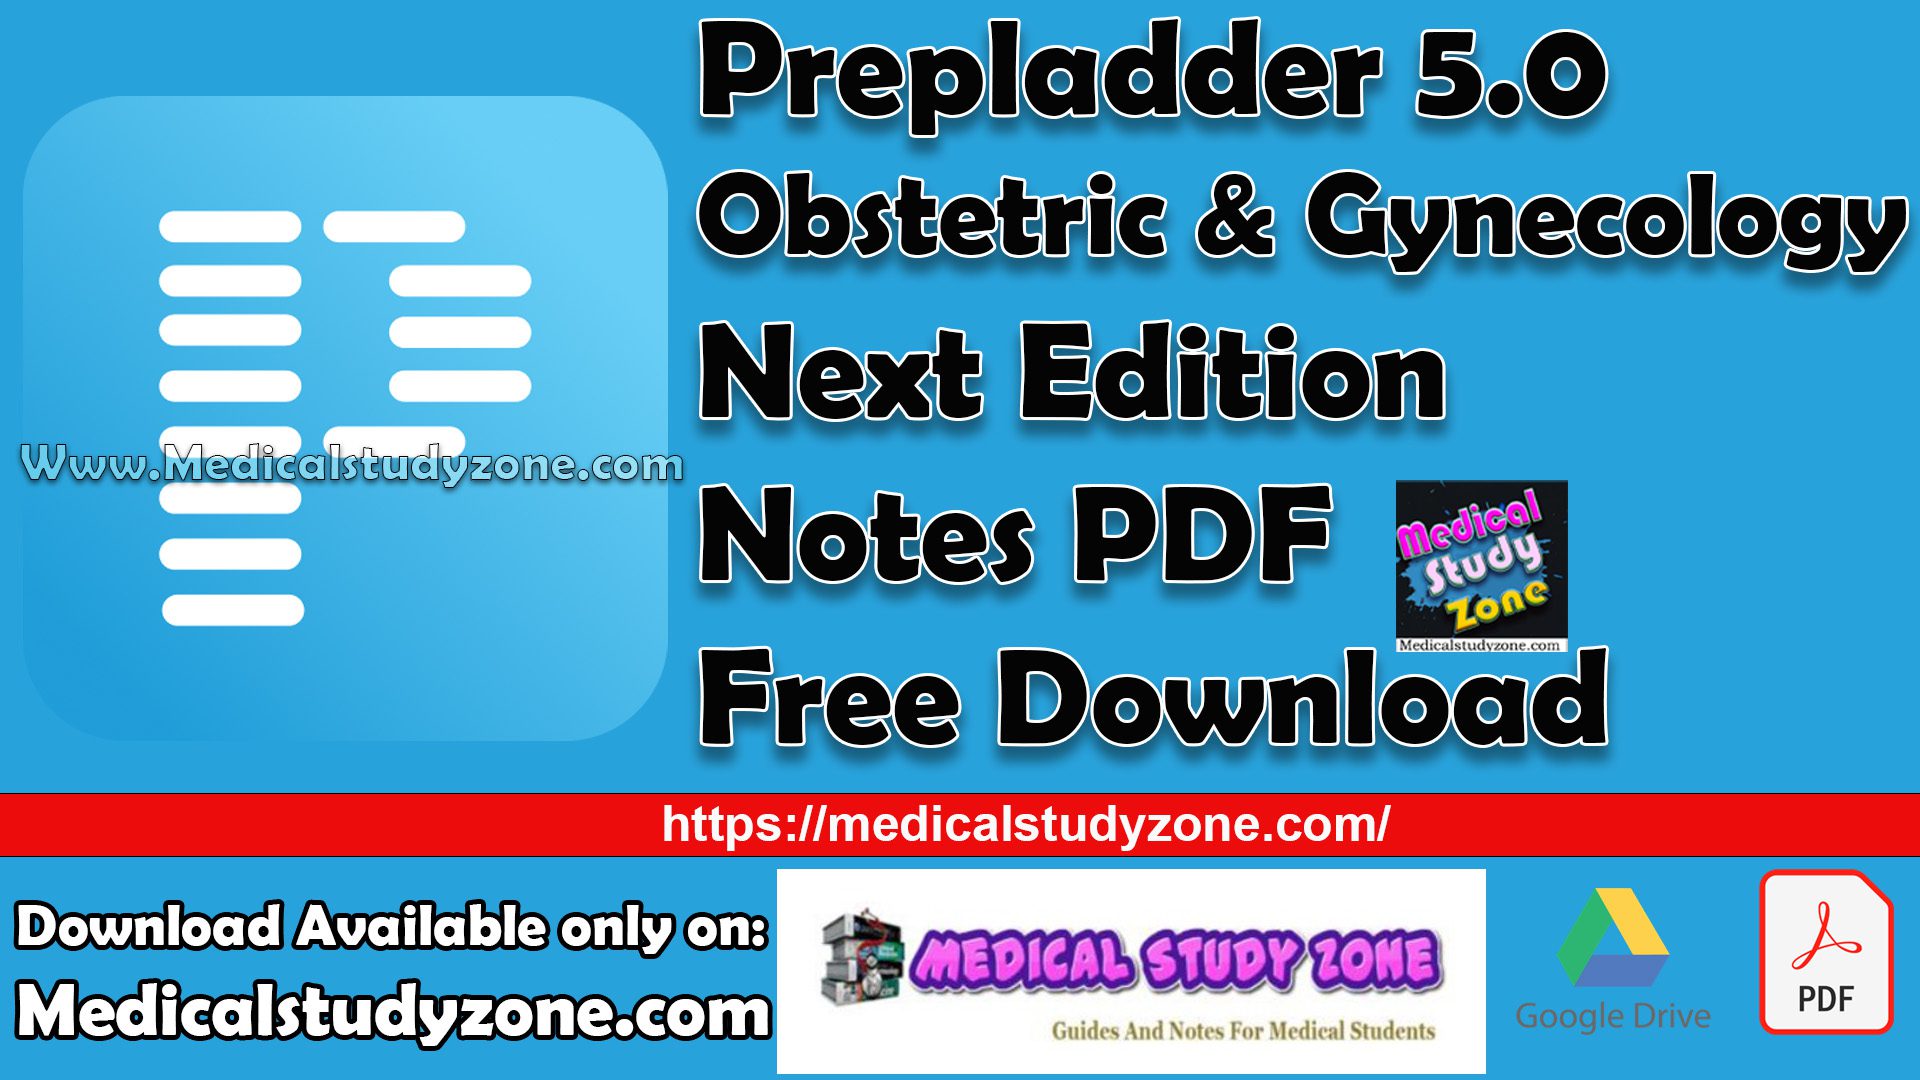 Prepladder Obstetric & Gynecology 5.0 Next Edition Notes PDF Free Download